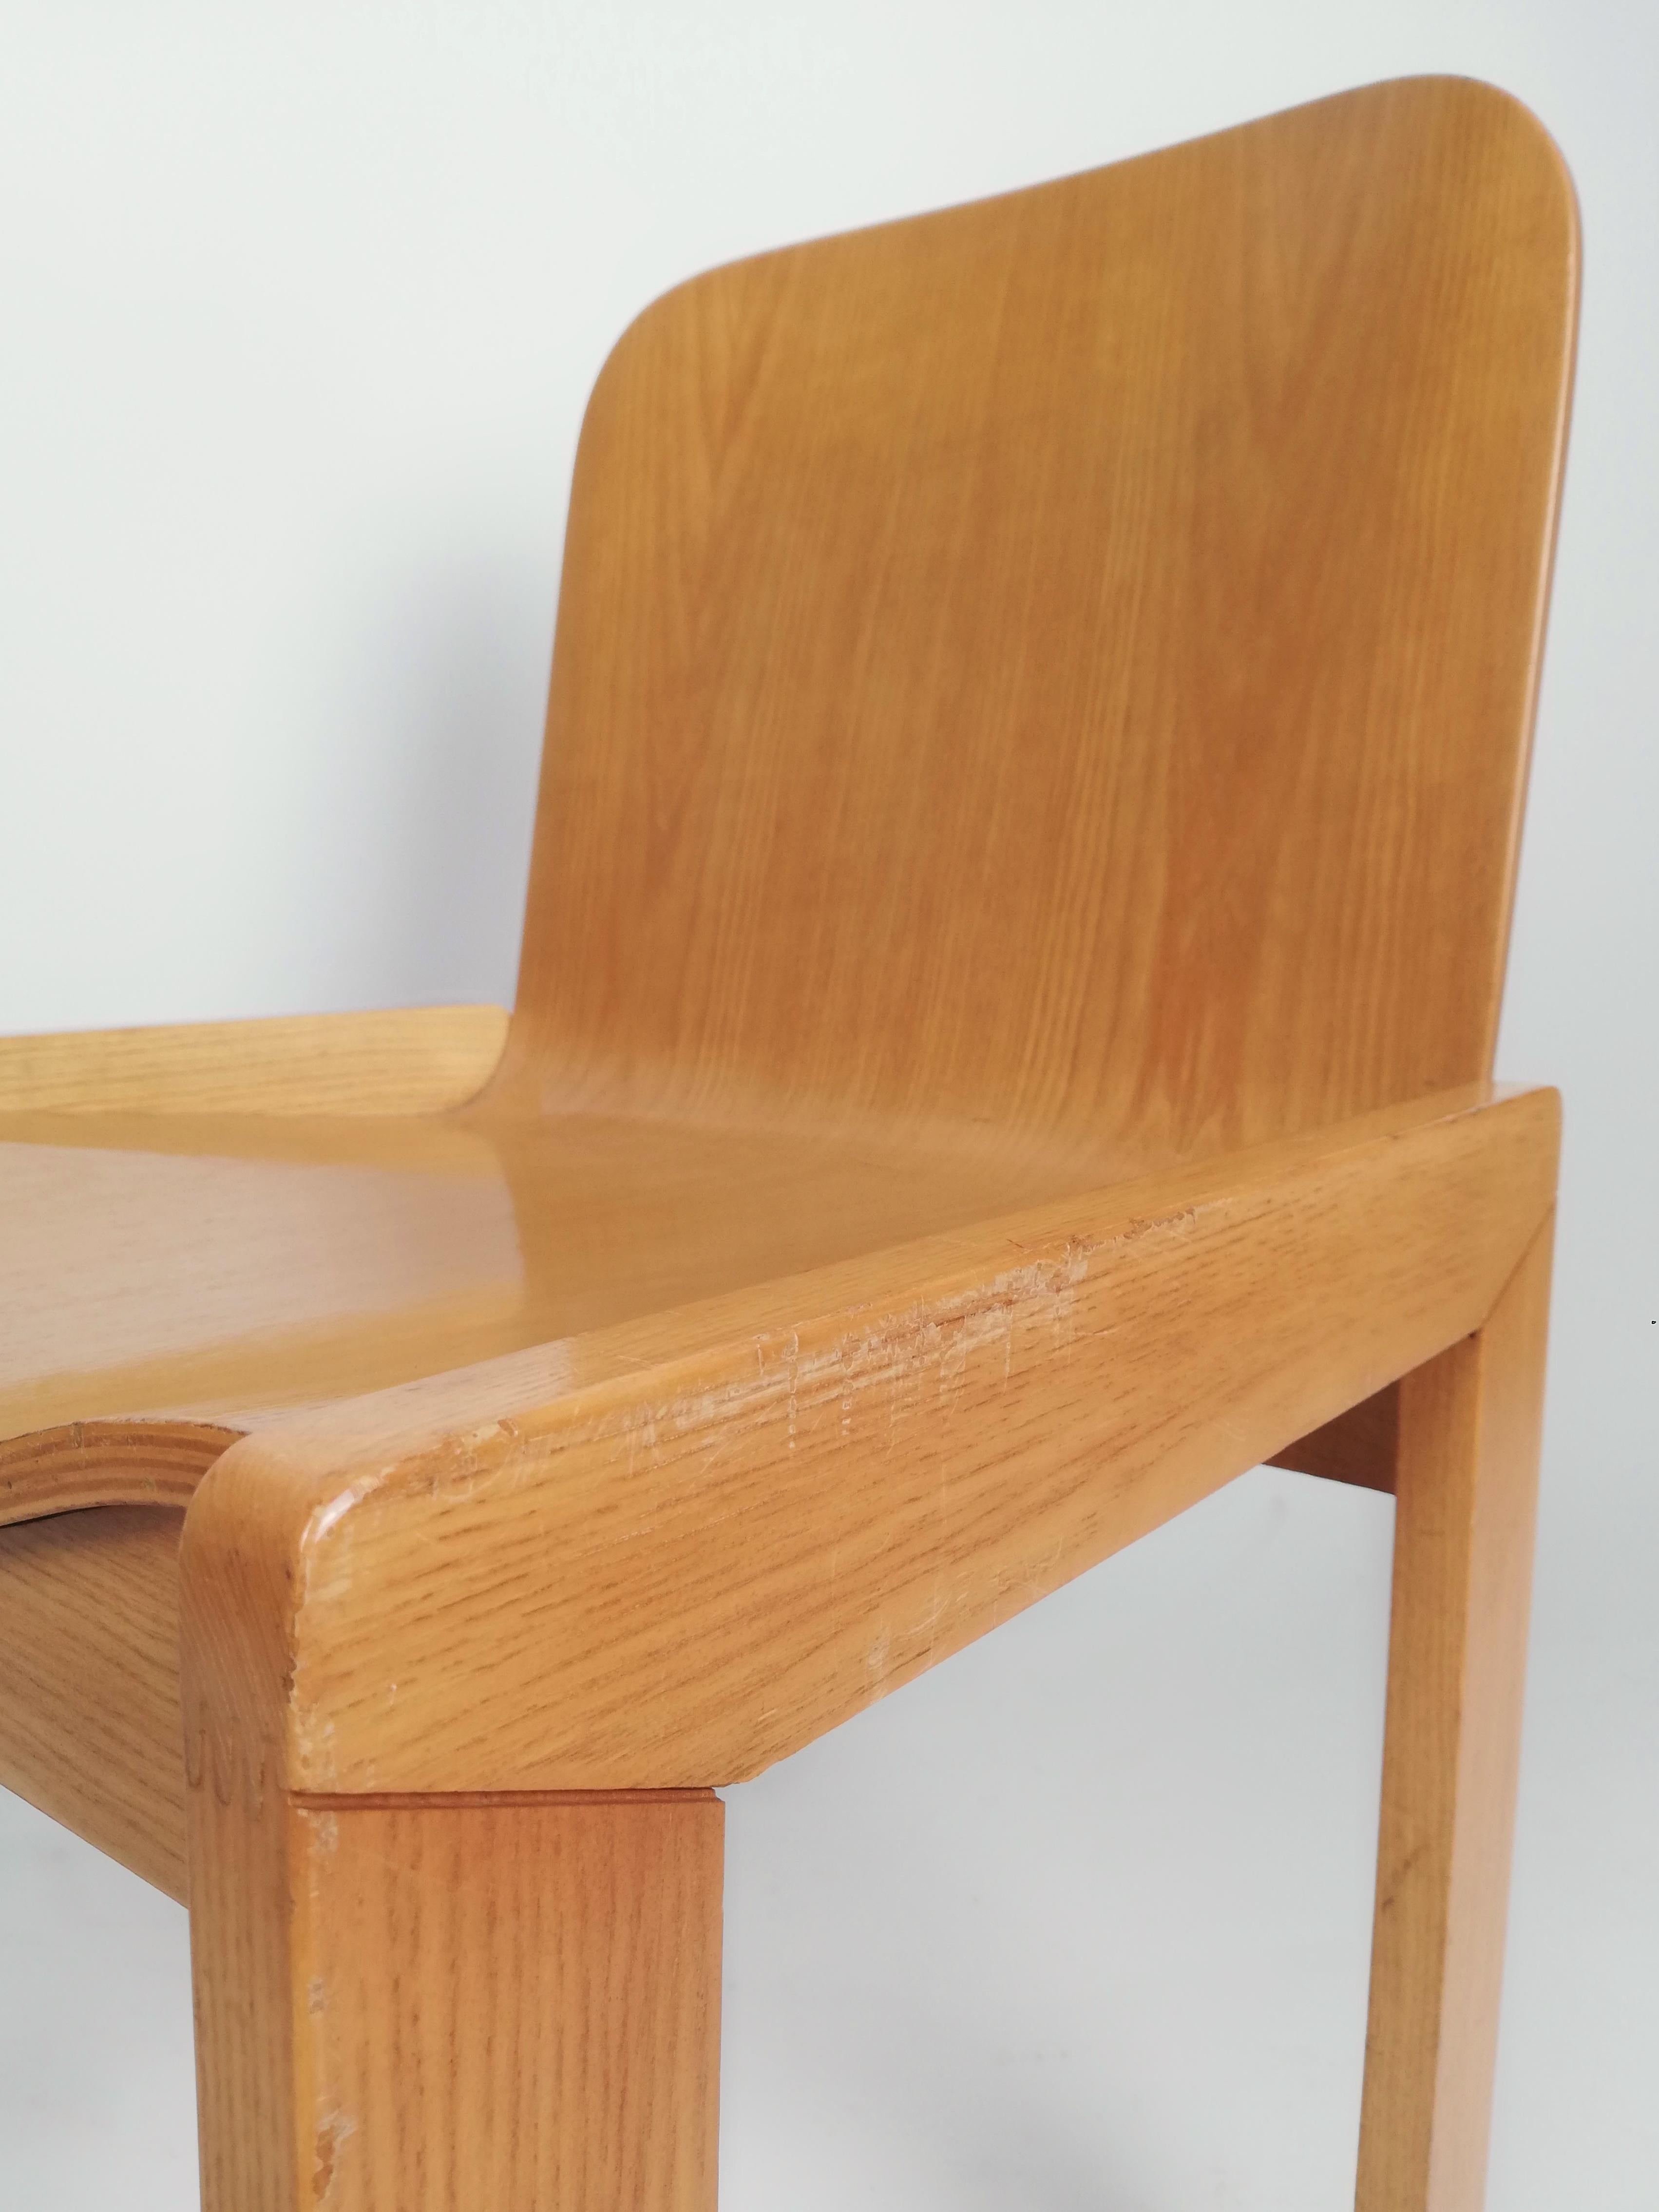 Mid-Century Modern 6 Curved Plywood Dining Chairs by Molteni in the style of Scarpa, Italy, 1970s For Sale